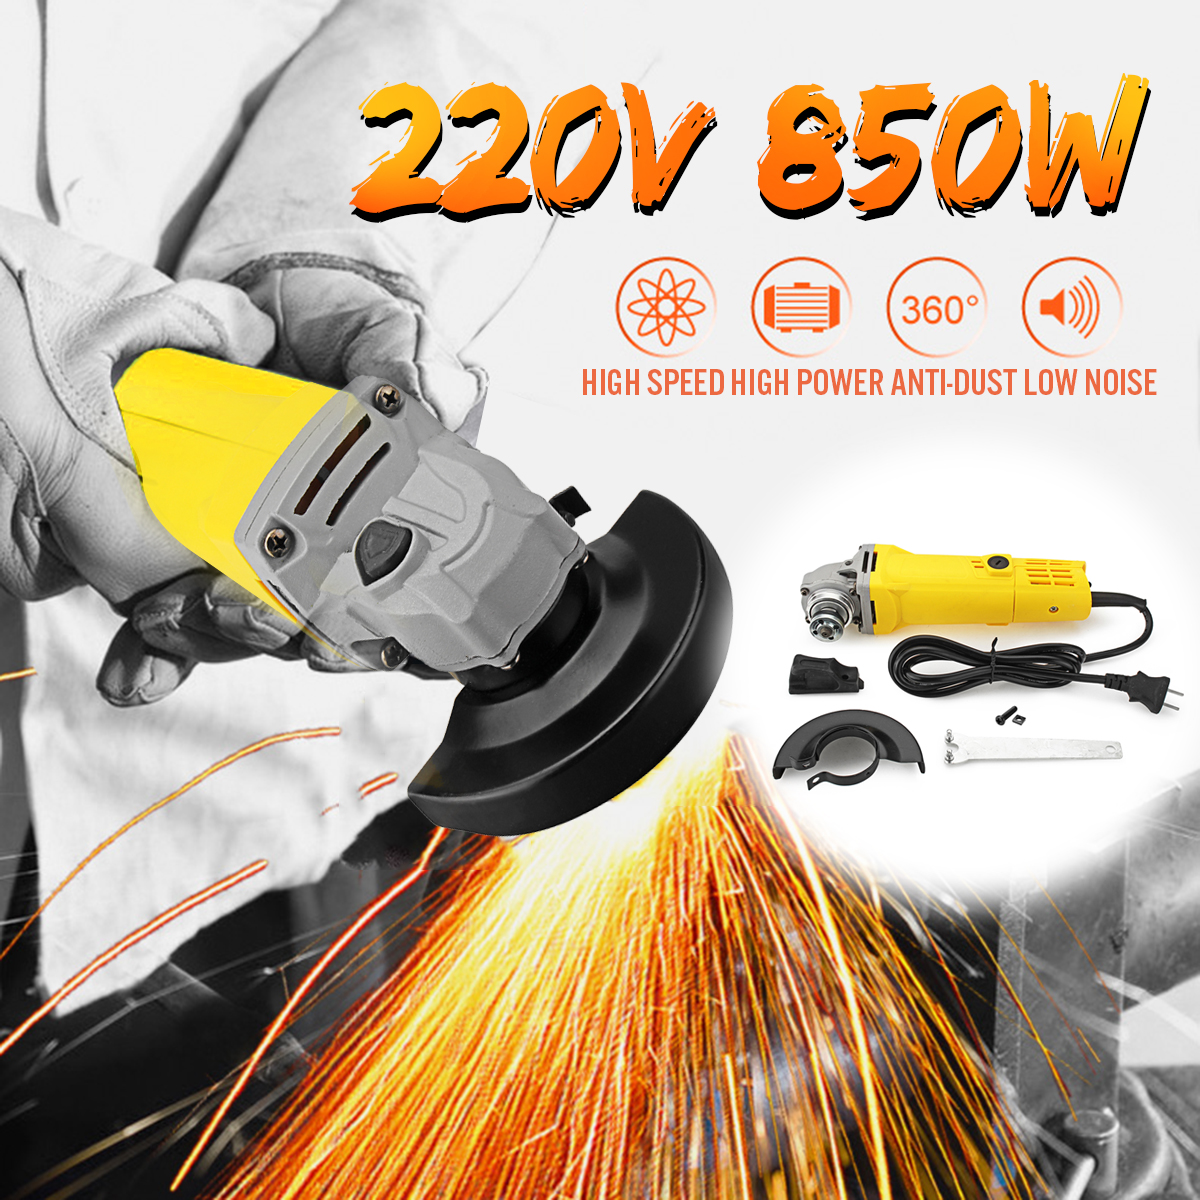 100mm-850W-220V-Portable-Electric-Angle-Grinder-Muti-Function-Household-Polish-Machine-Grinding-Cutt-1391941-1